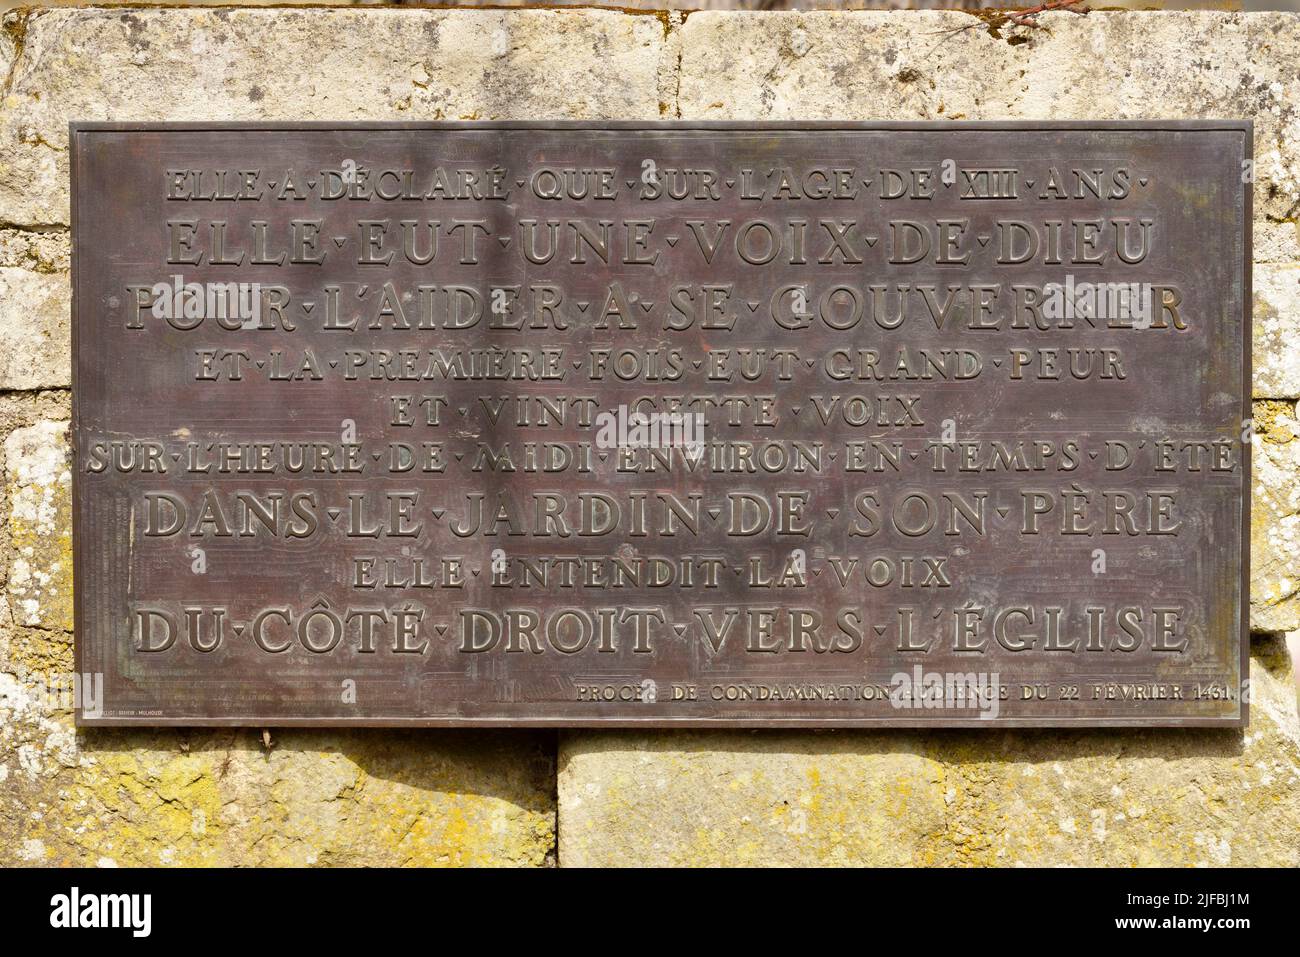 France, Vosges, Domremy la Pucelle, birthplace of Joan of Arc, Jeanne's birthplace, plaque commemorating the place in the garden where Jeanne d'Arc heard the voice of God Stock Photo